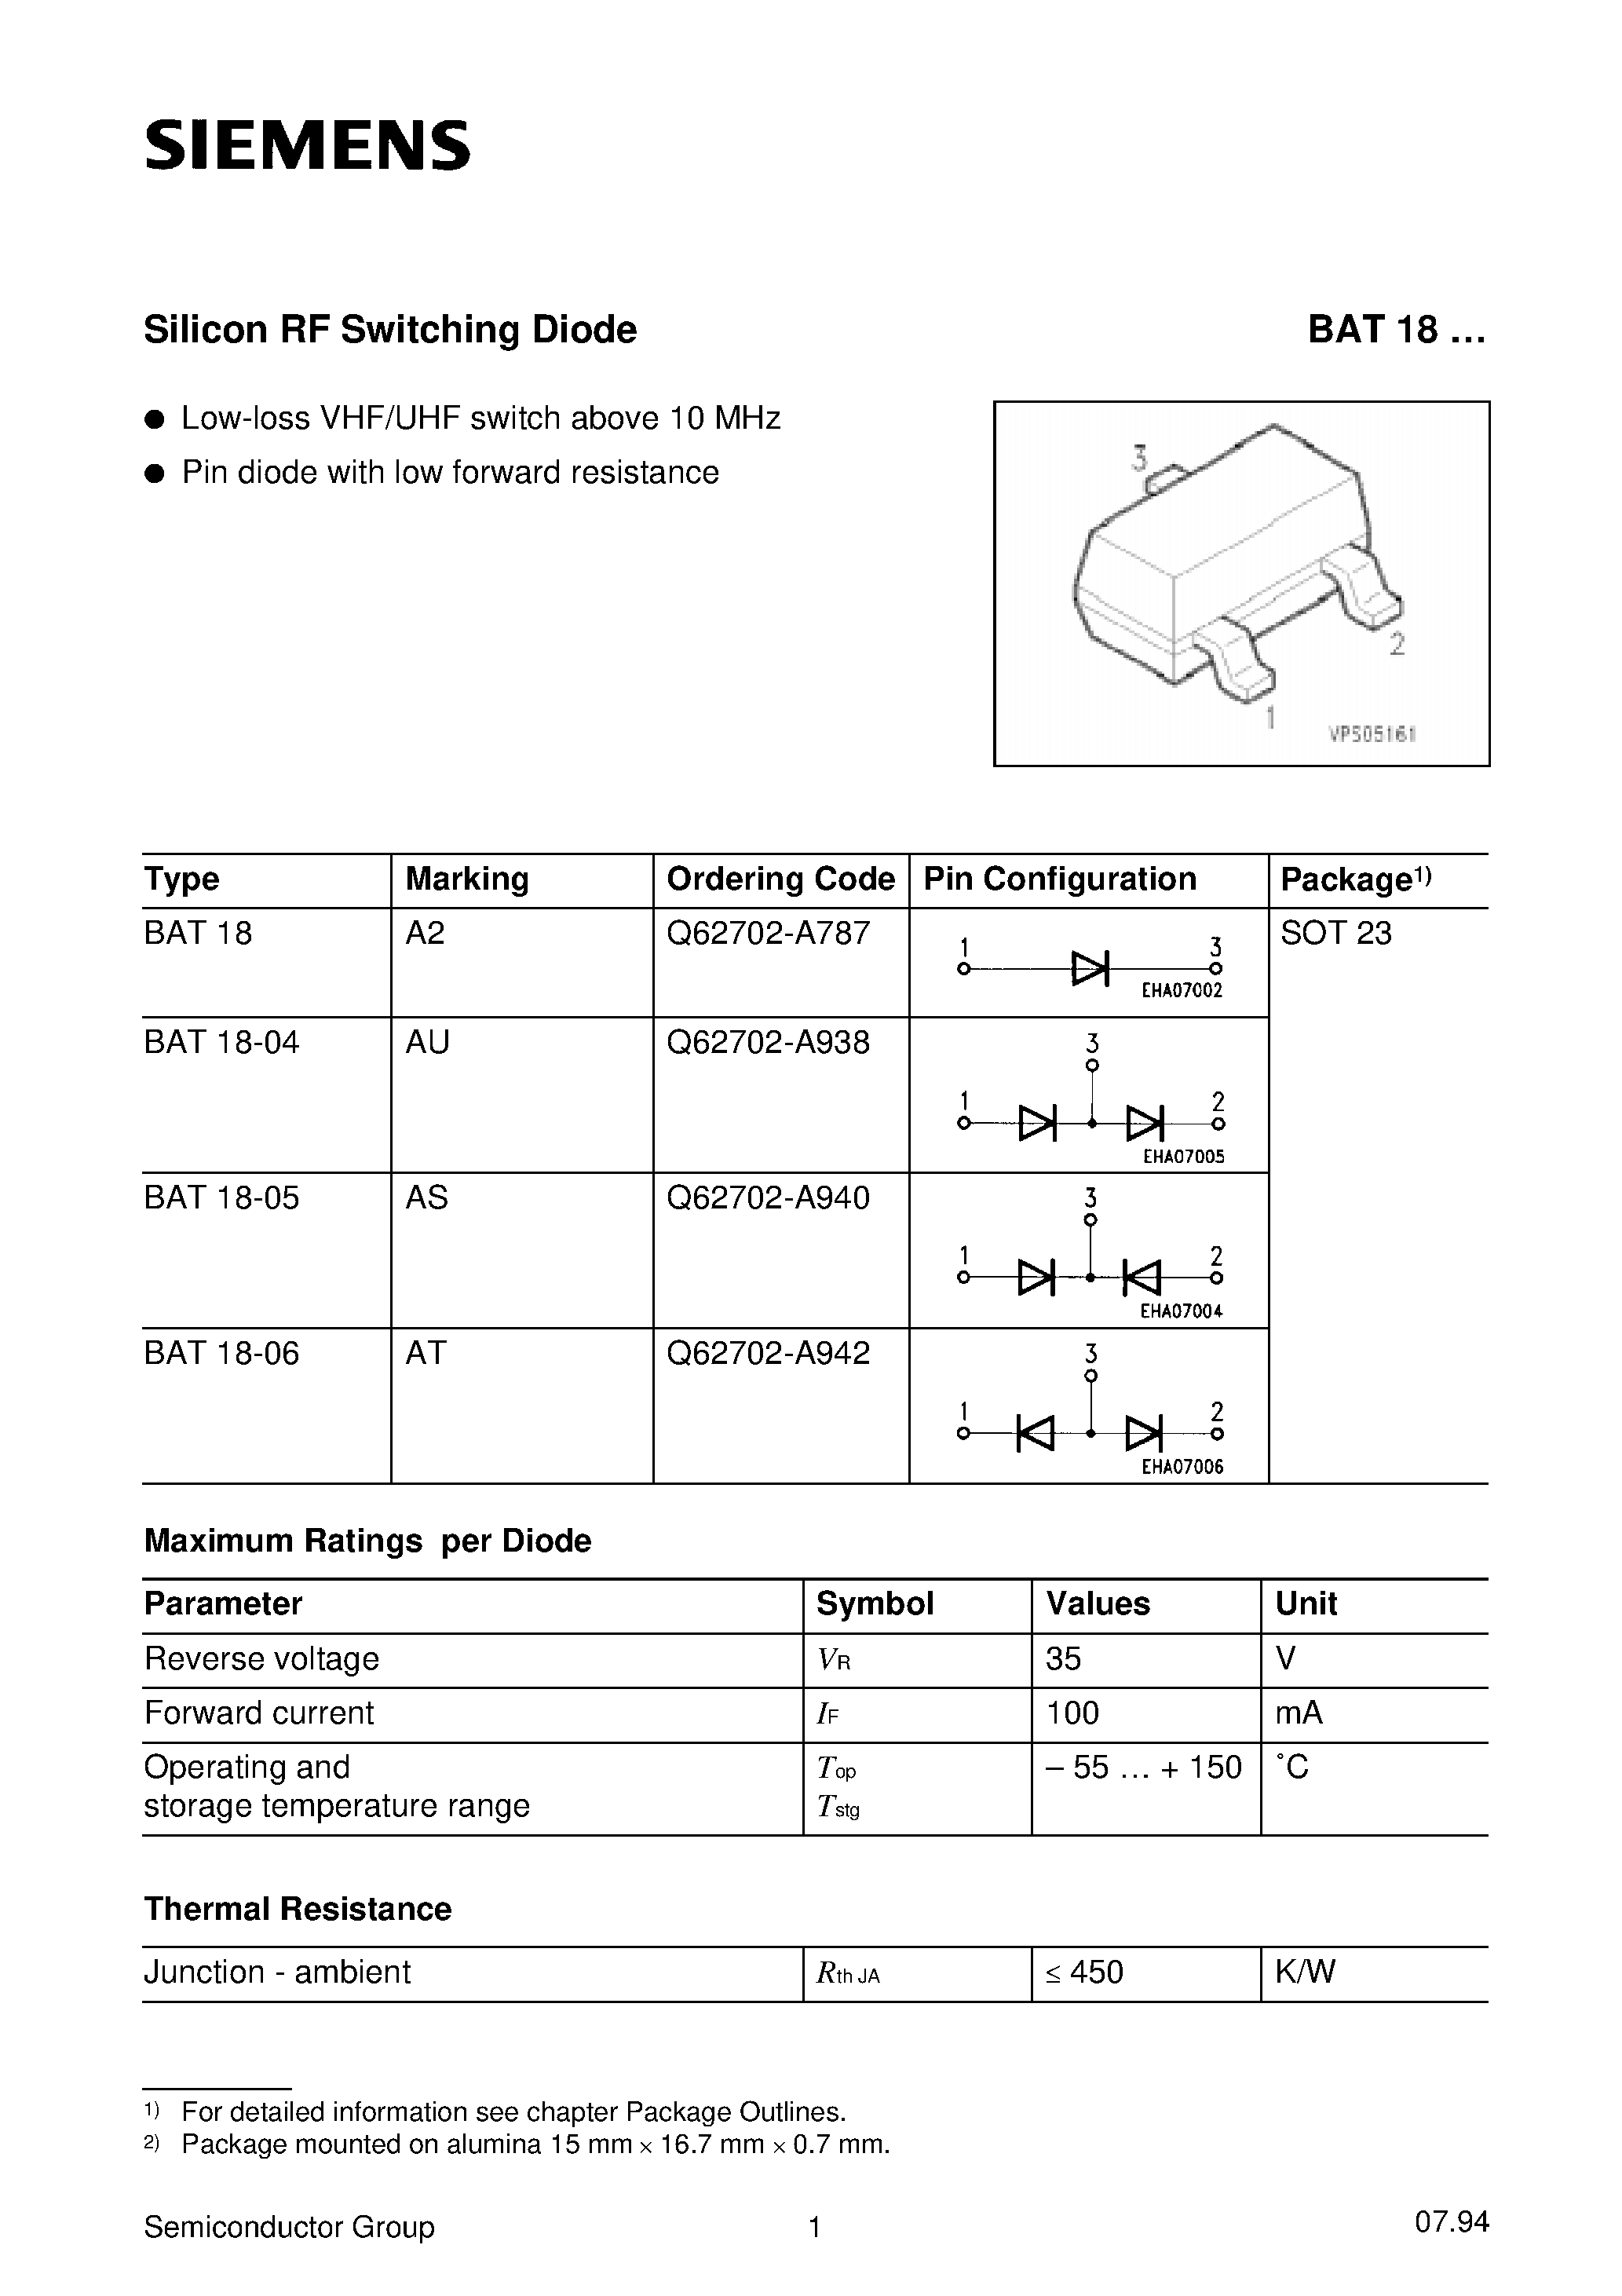 Datasheet BAT18 - Silicon RF Switching Diode (Low-loss VHF/UHF switch above 10 MHz Pin diode with low forward resistance) page 1